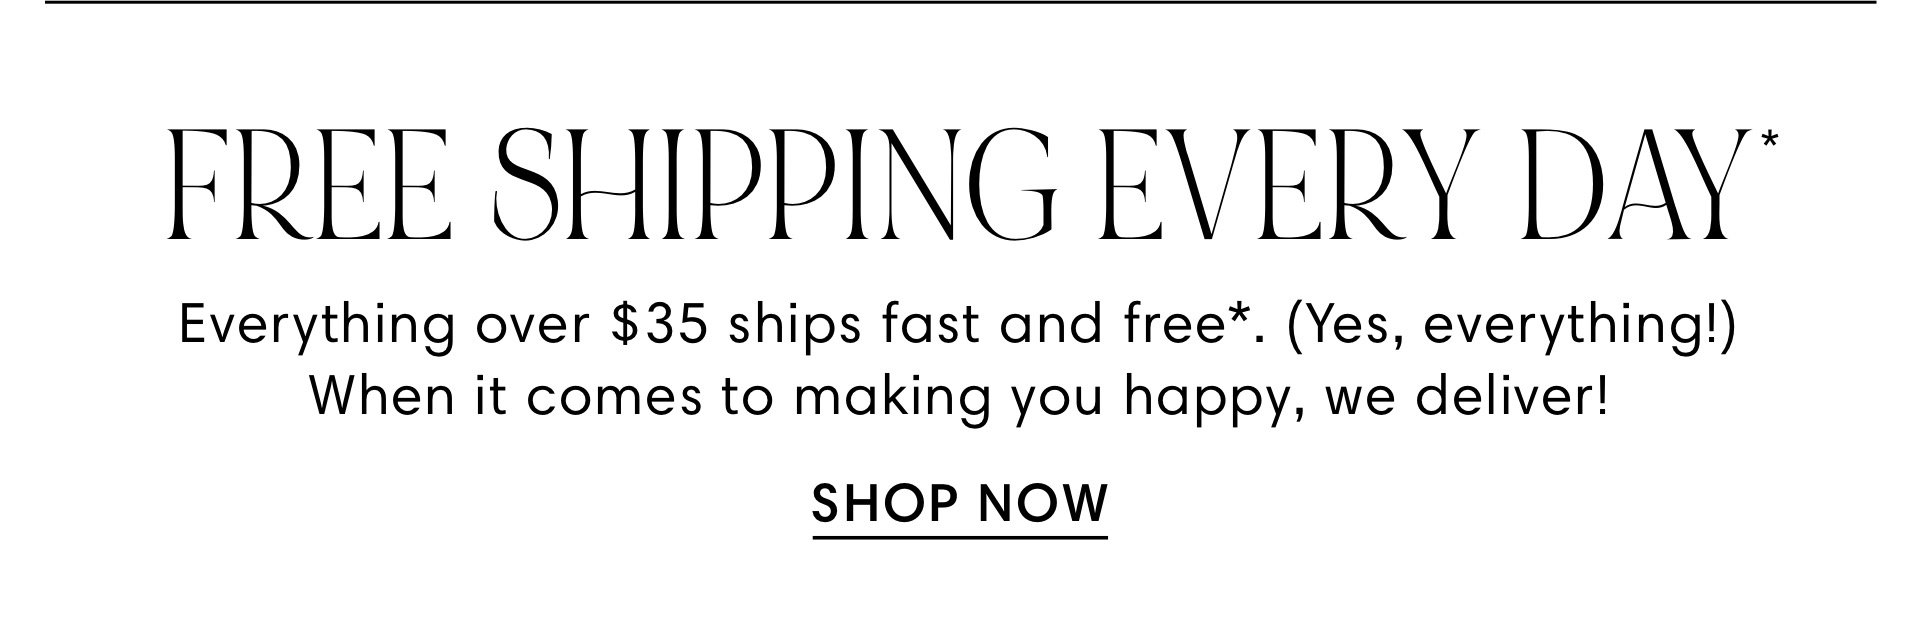 FREE SHIPPING EVERY DAY Everything over $35 ships fast and free*. Yes, everything! When it comes to making you happy, we deliver! SHOP NOW 